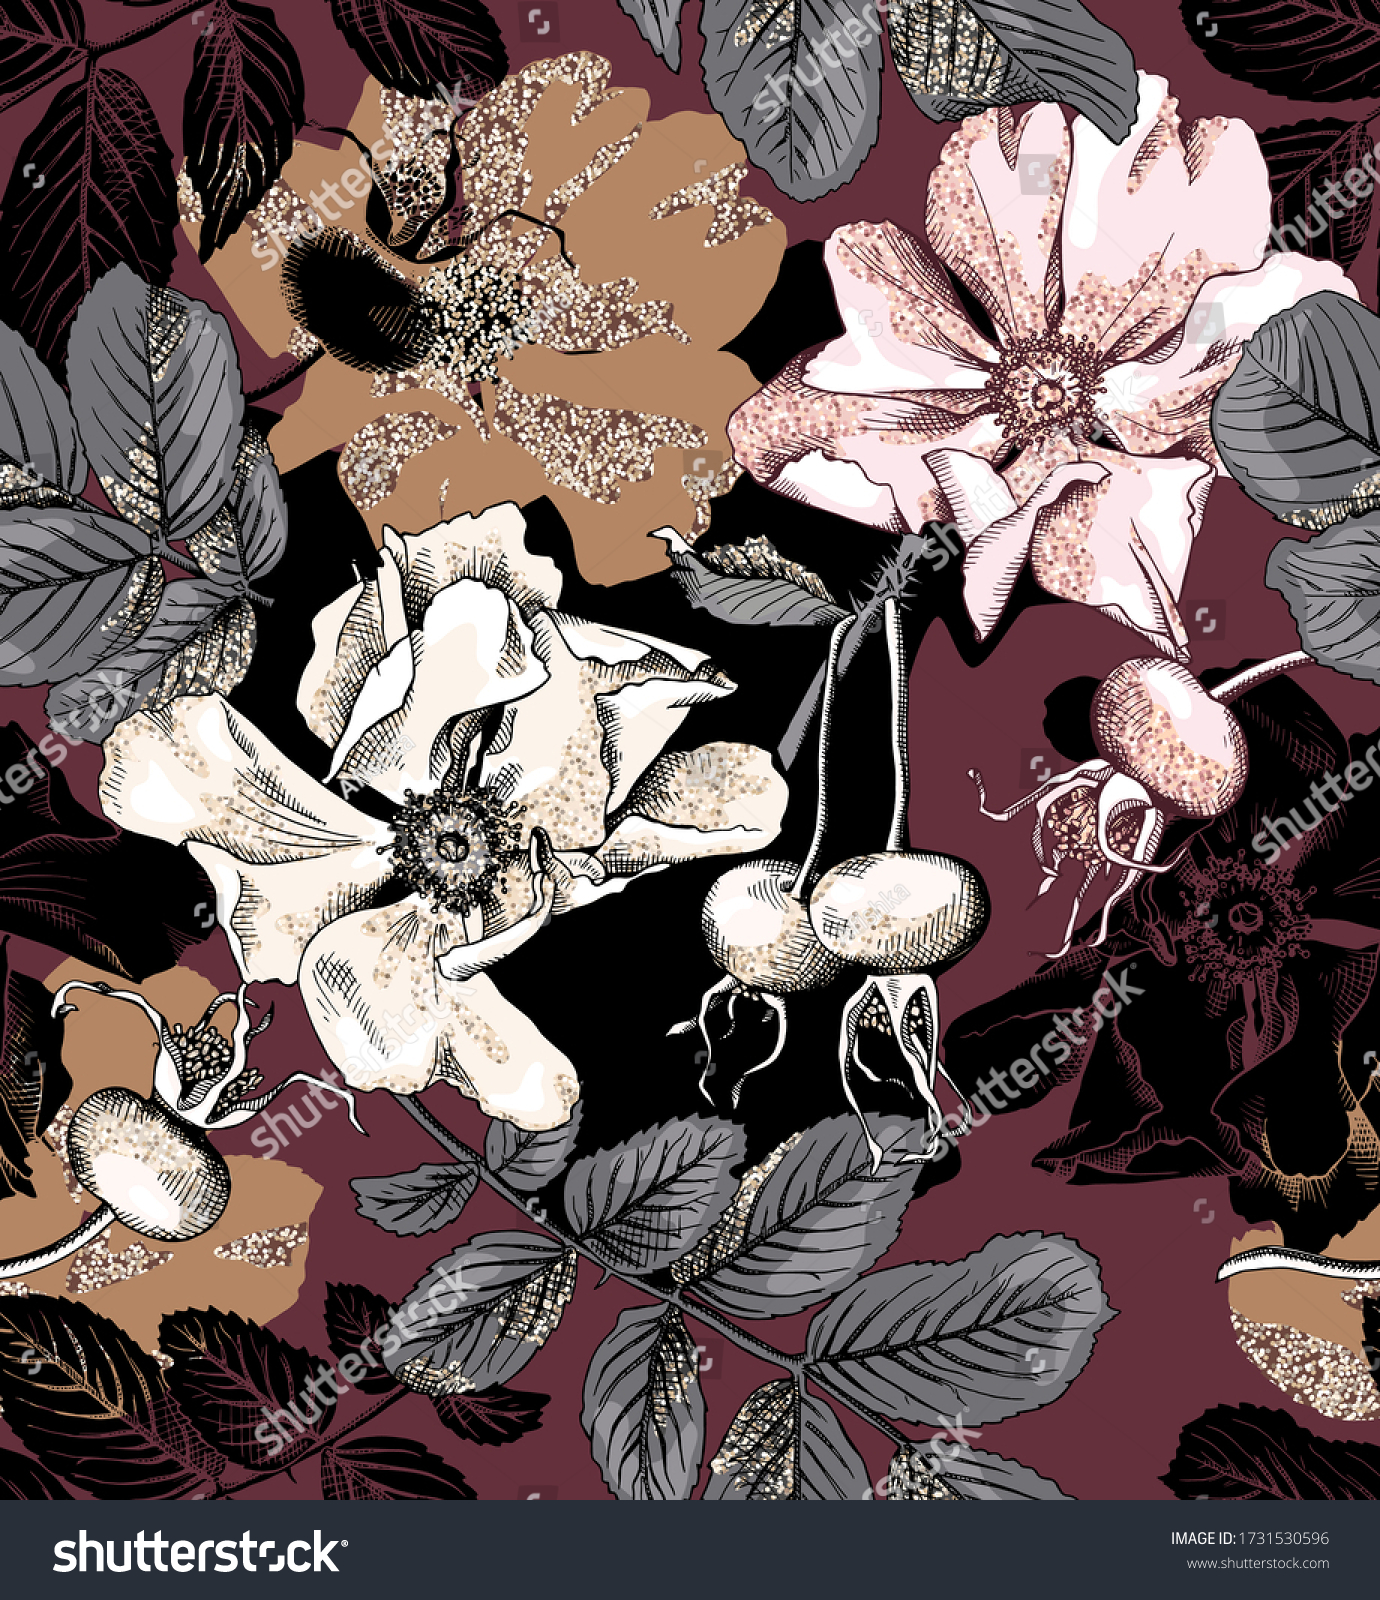 SVG of Seamless wallpaper pattern. White Gold glitter Dog-rose flowers, leaves and berries on a burgundy background. Textile composition, hand drawn style print. Vector illustration. svg